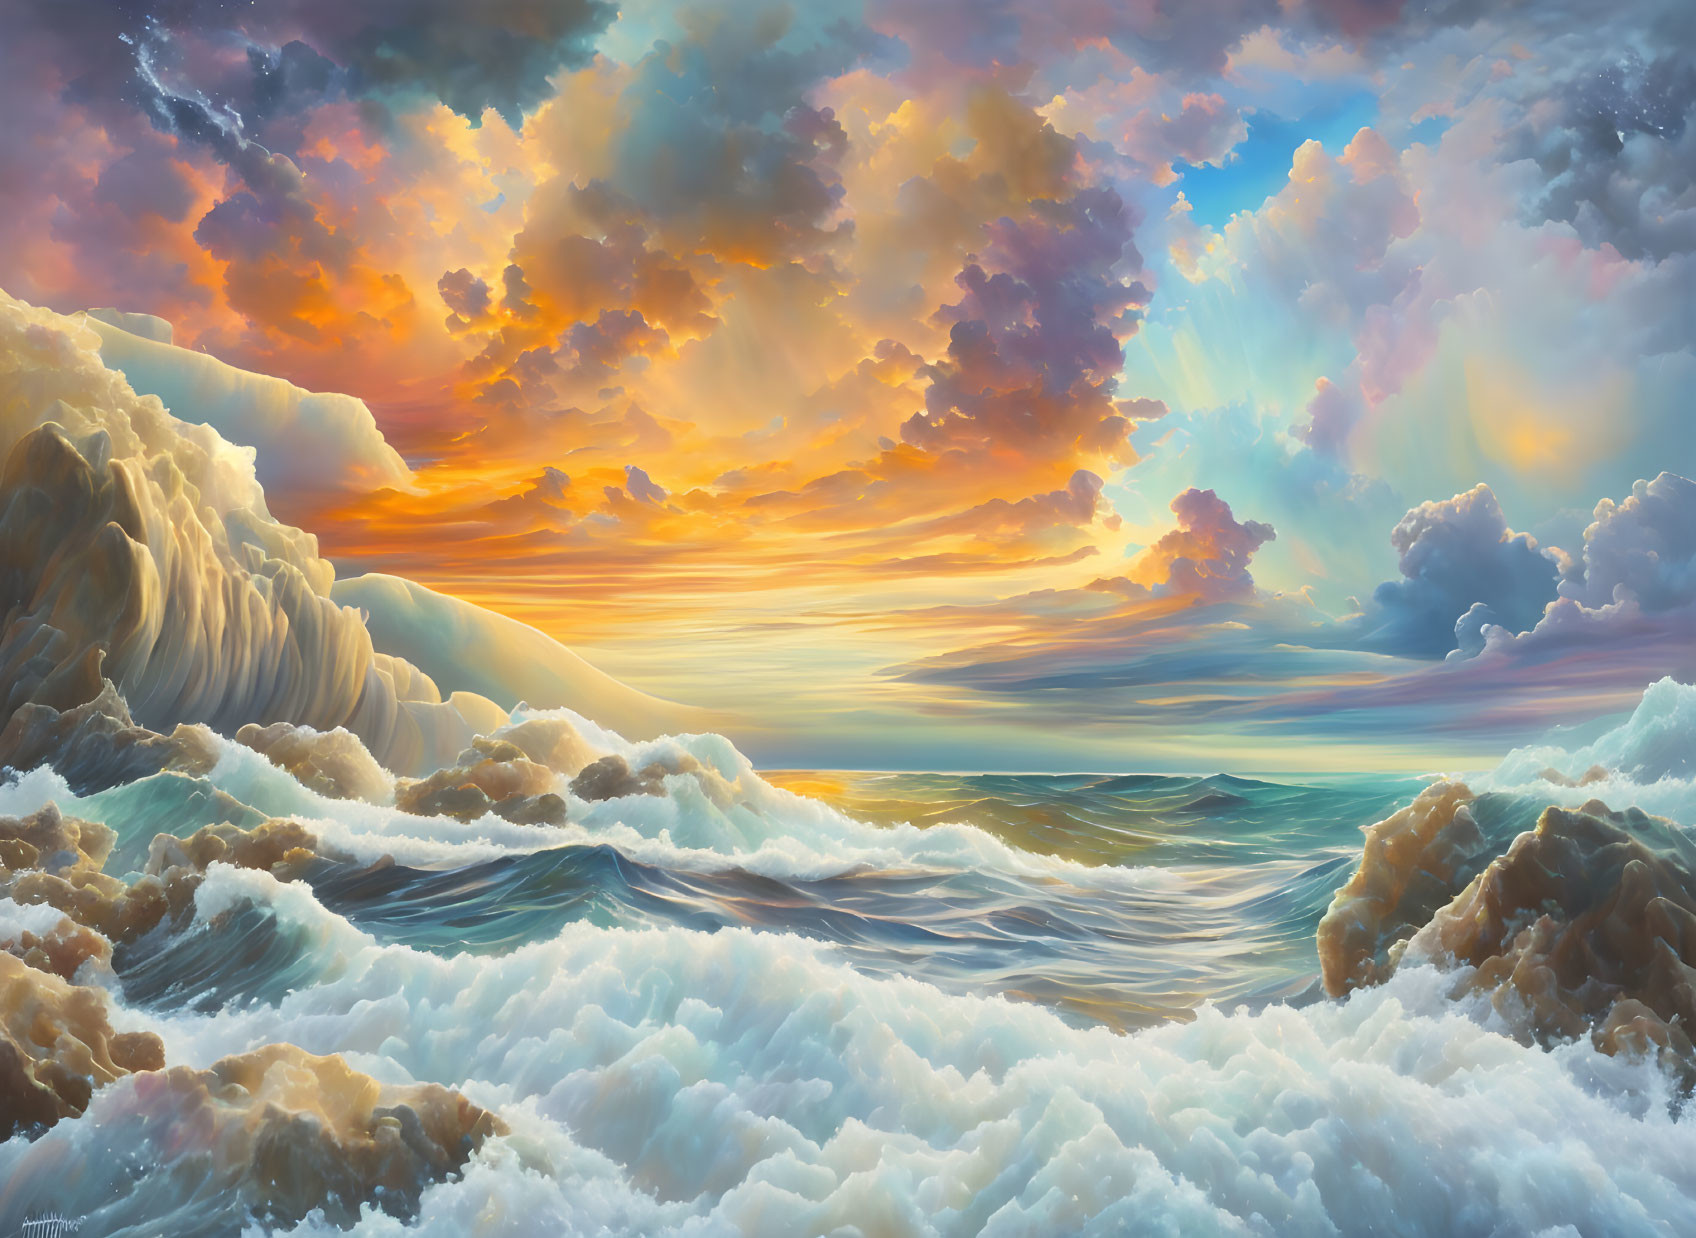 Scenic ocean sunset with dynamic clouds and crashing waves